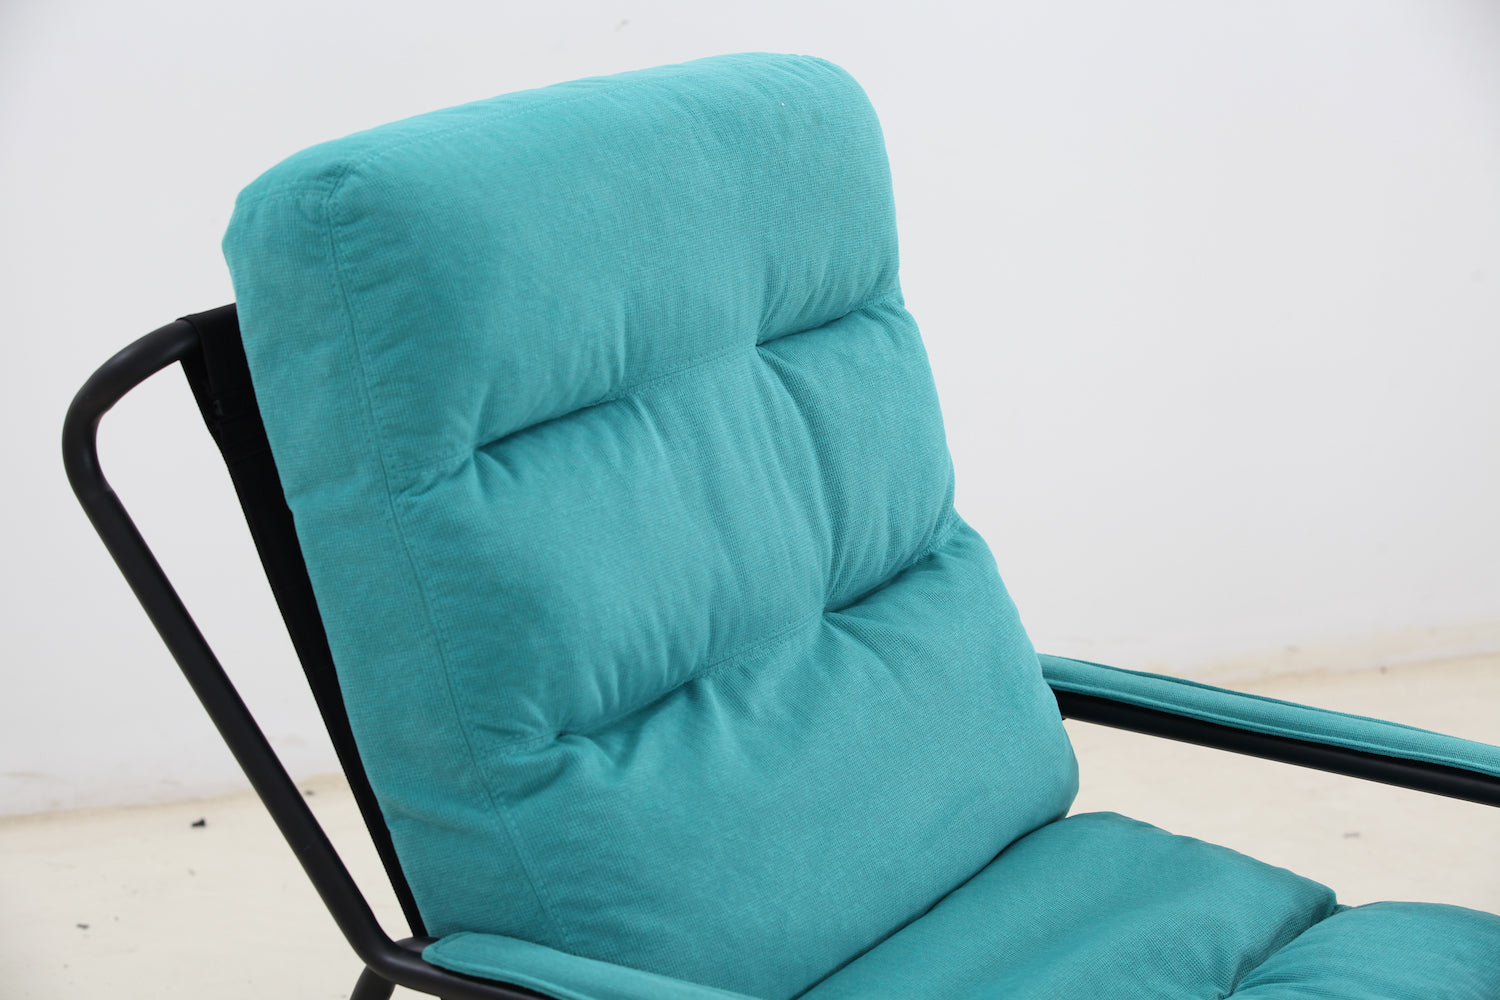 Justone Recline Back Club Chair - Turquoise